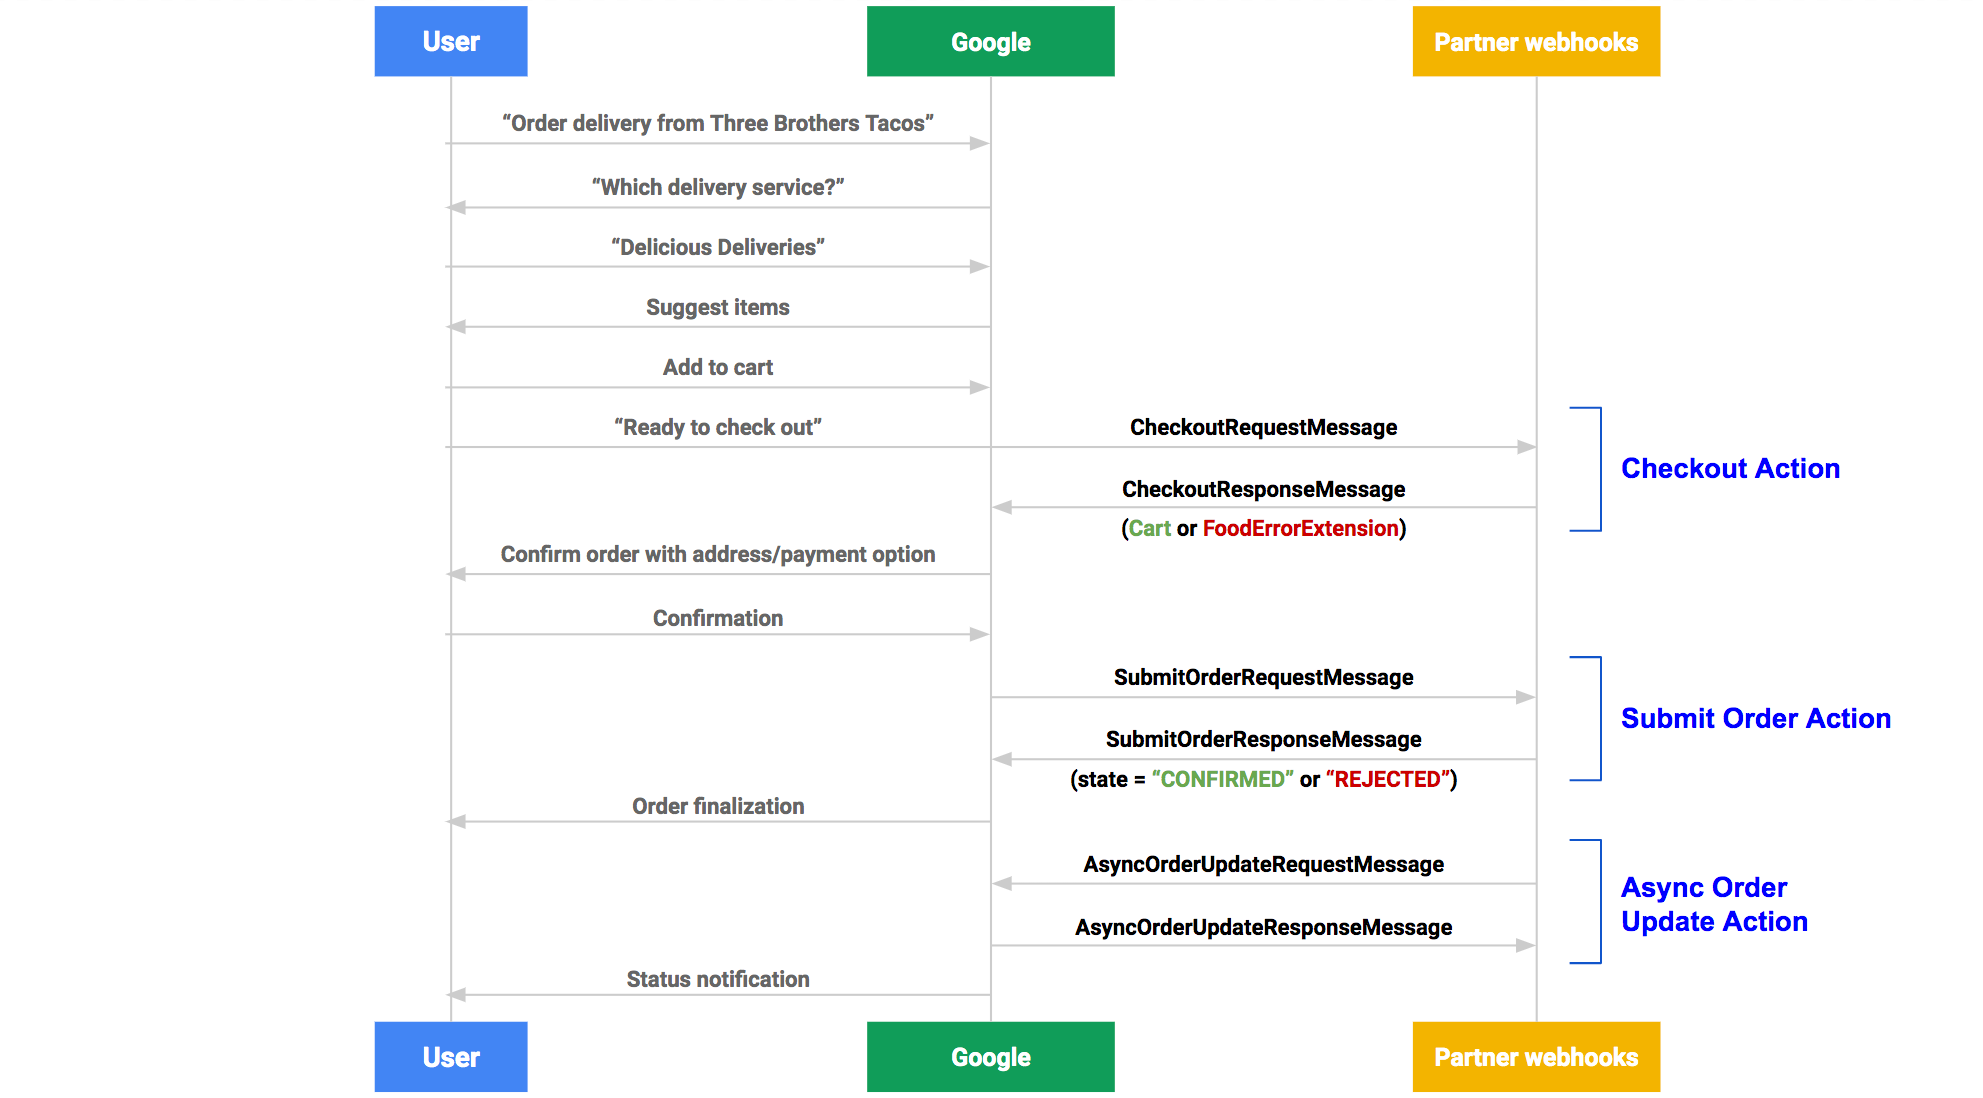 Order with Google fulfillment flow